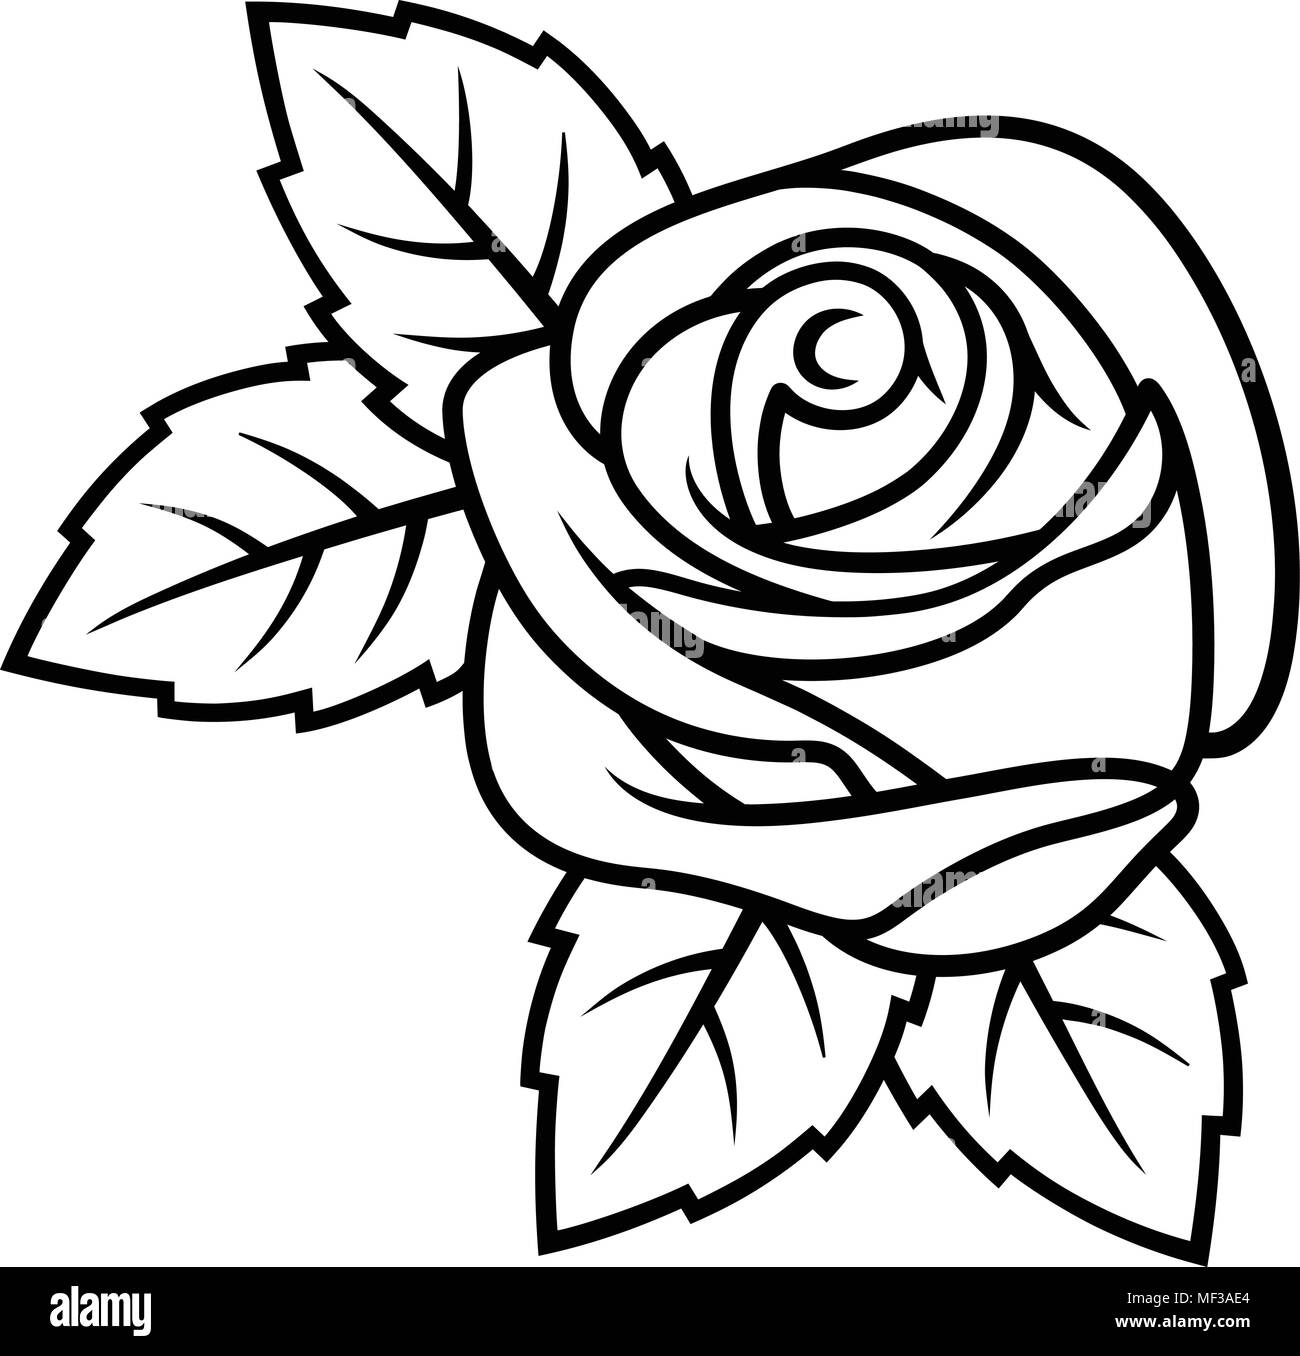 Sketch of Rose isolated on white background. Use for fabric design, tattoo, pattern and decorating greeting cards, invitations Stock Vector